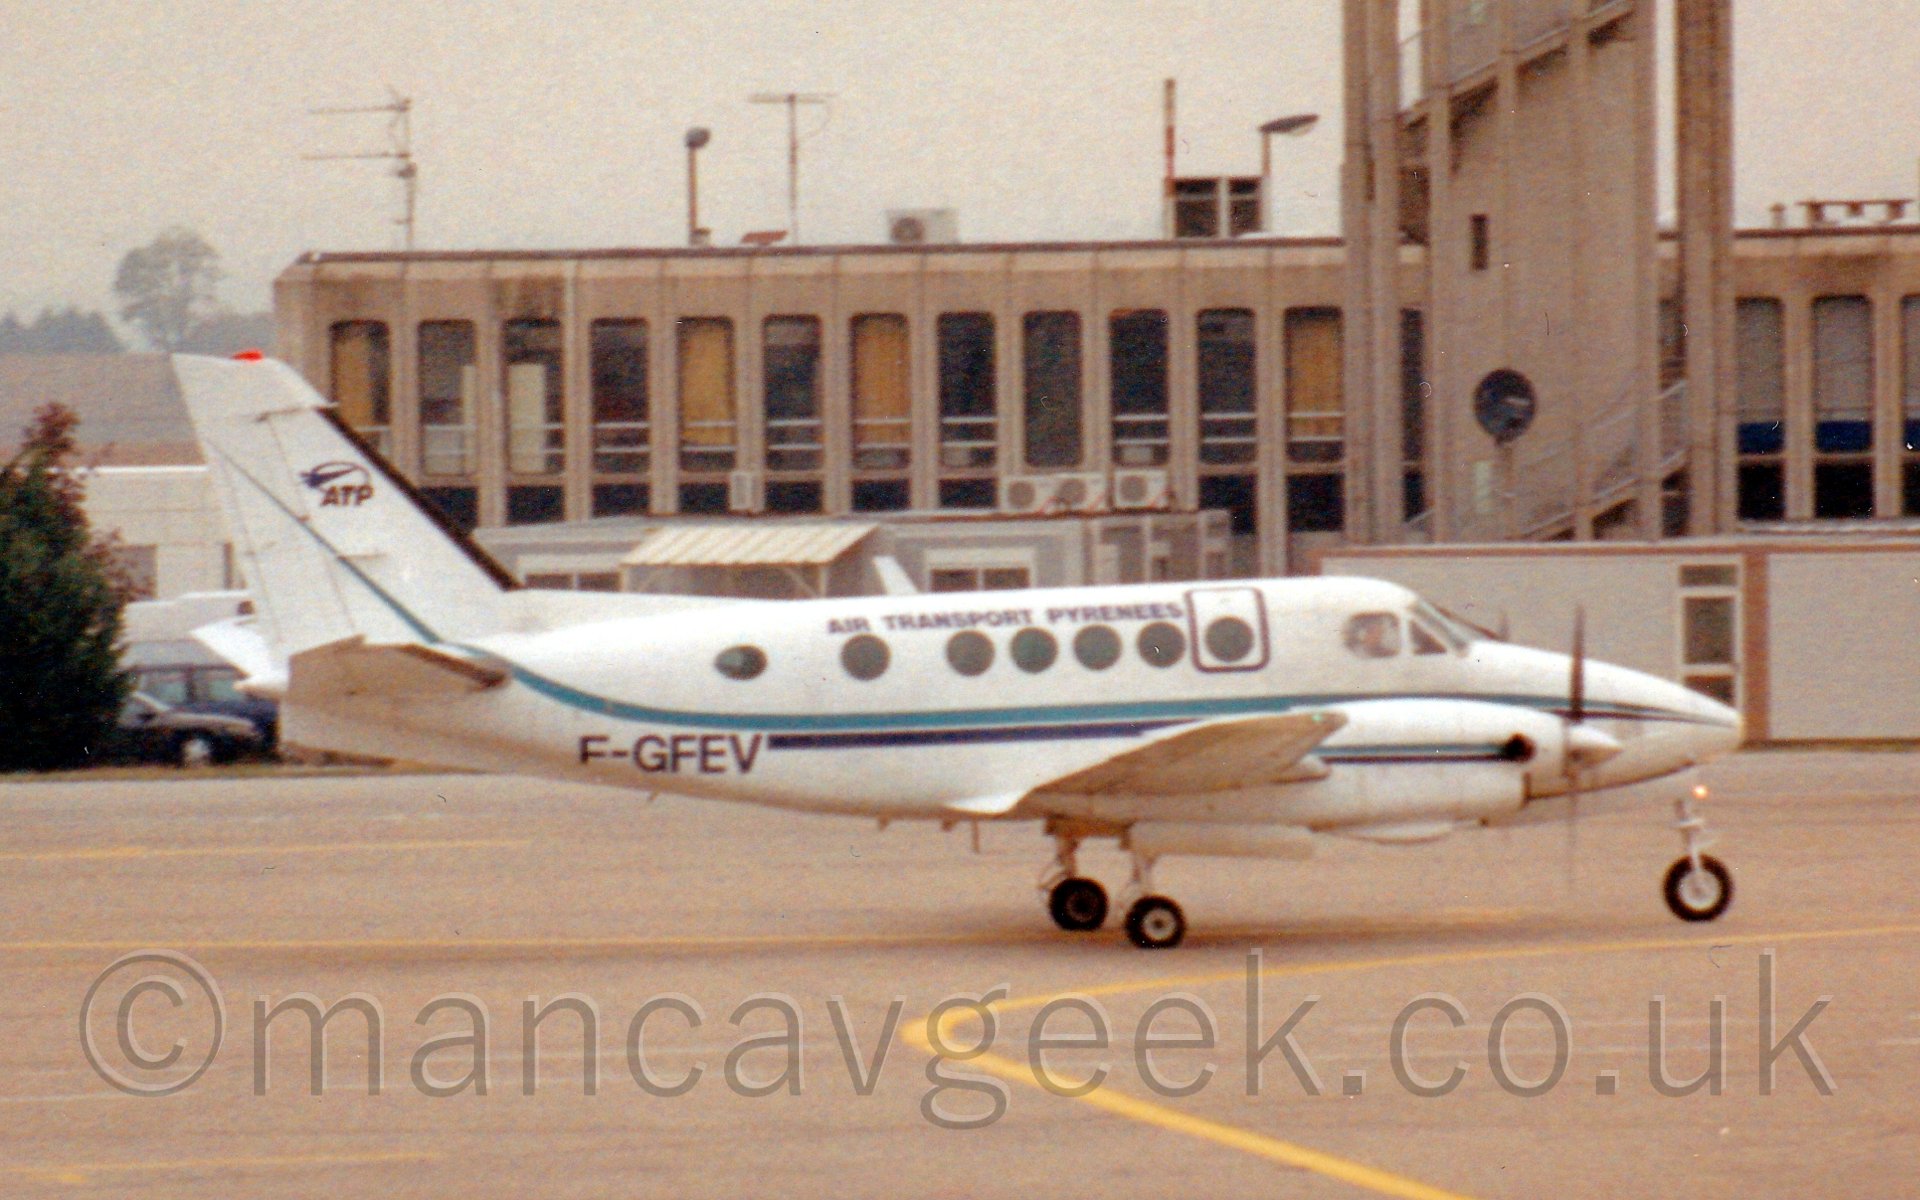 Side view of a white, twin engined bizprop, taxiing from left to right, with a sandy-brown terminal building in the background.